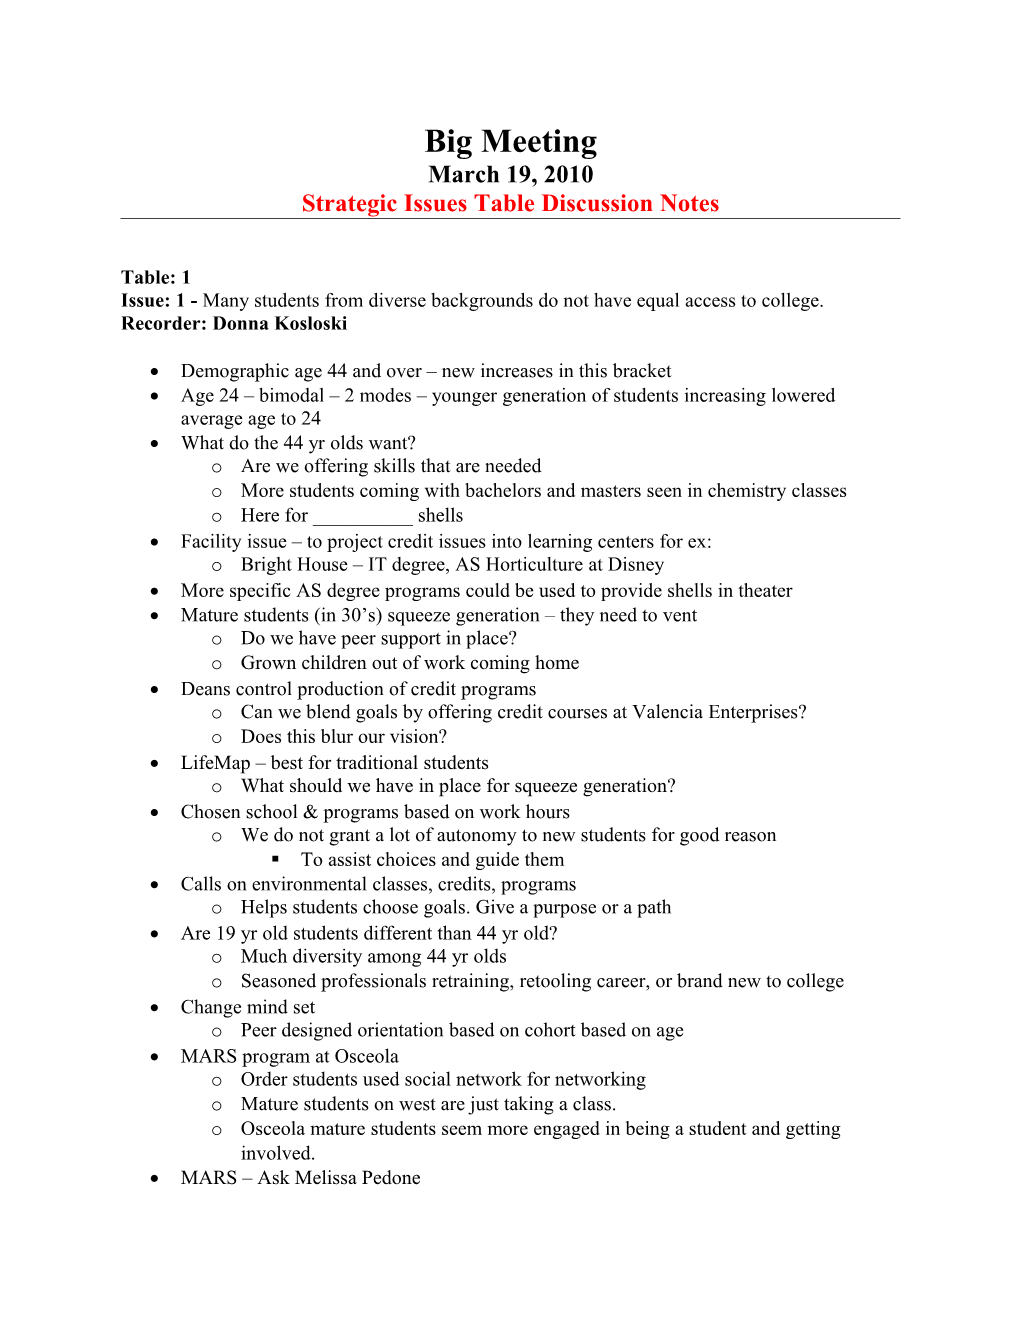 Strategic Issues Table Discussion Notes